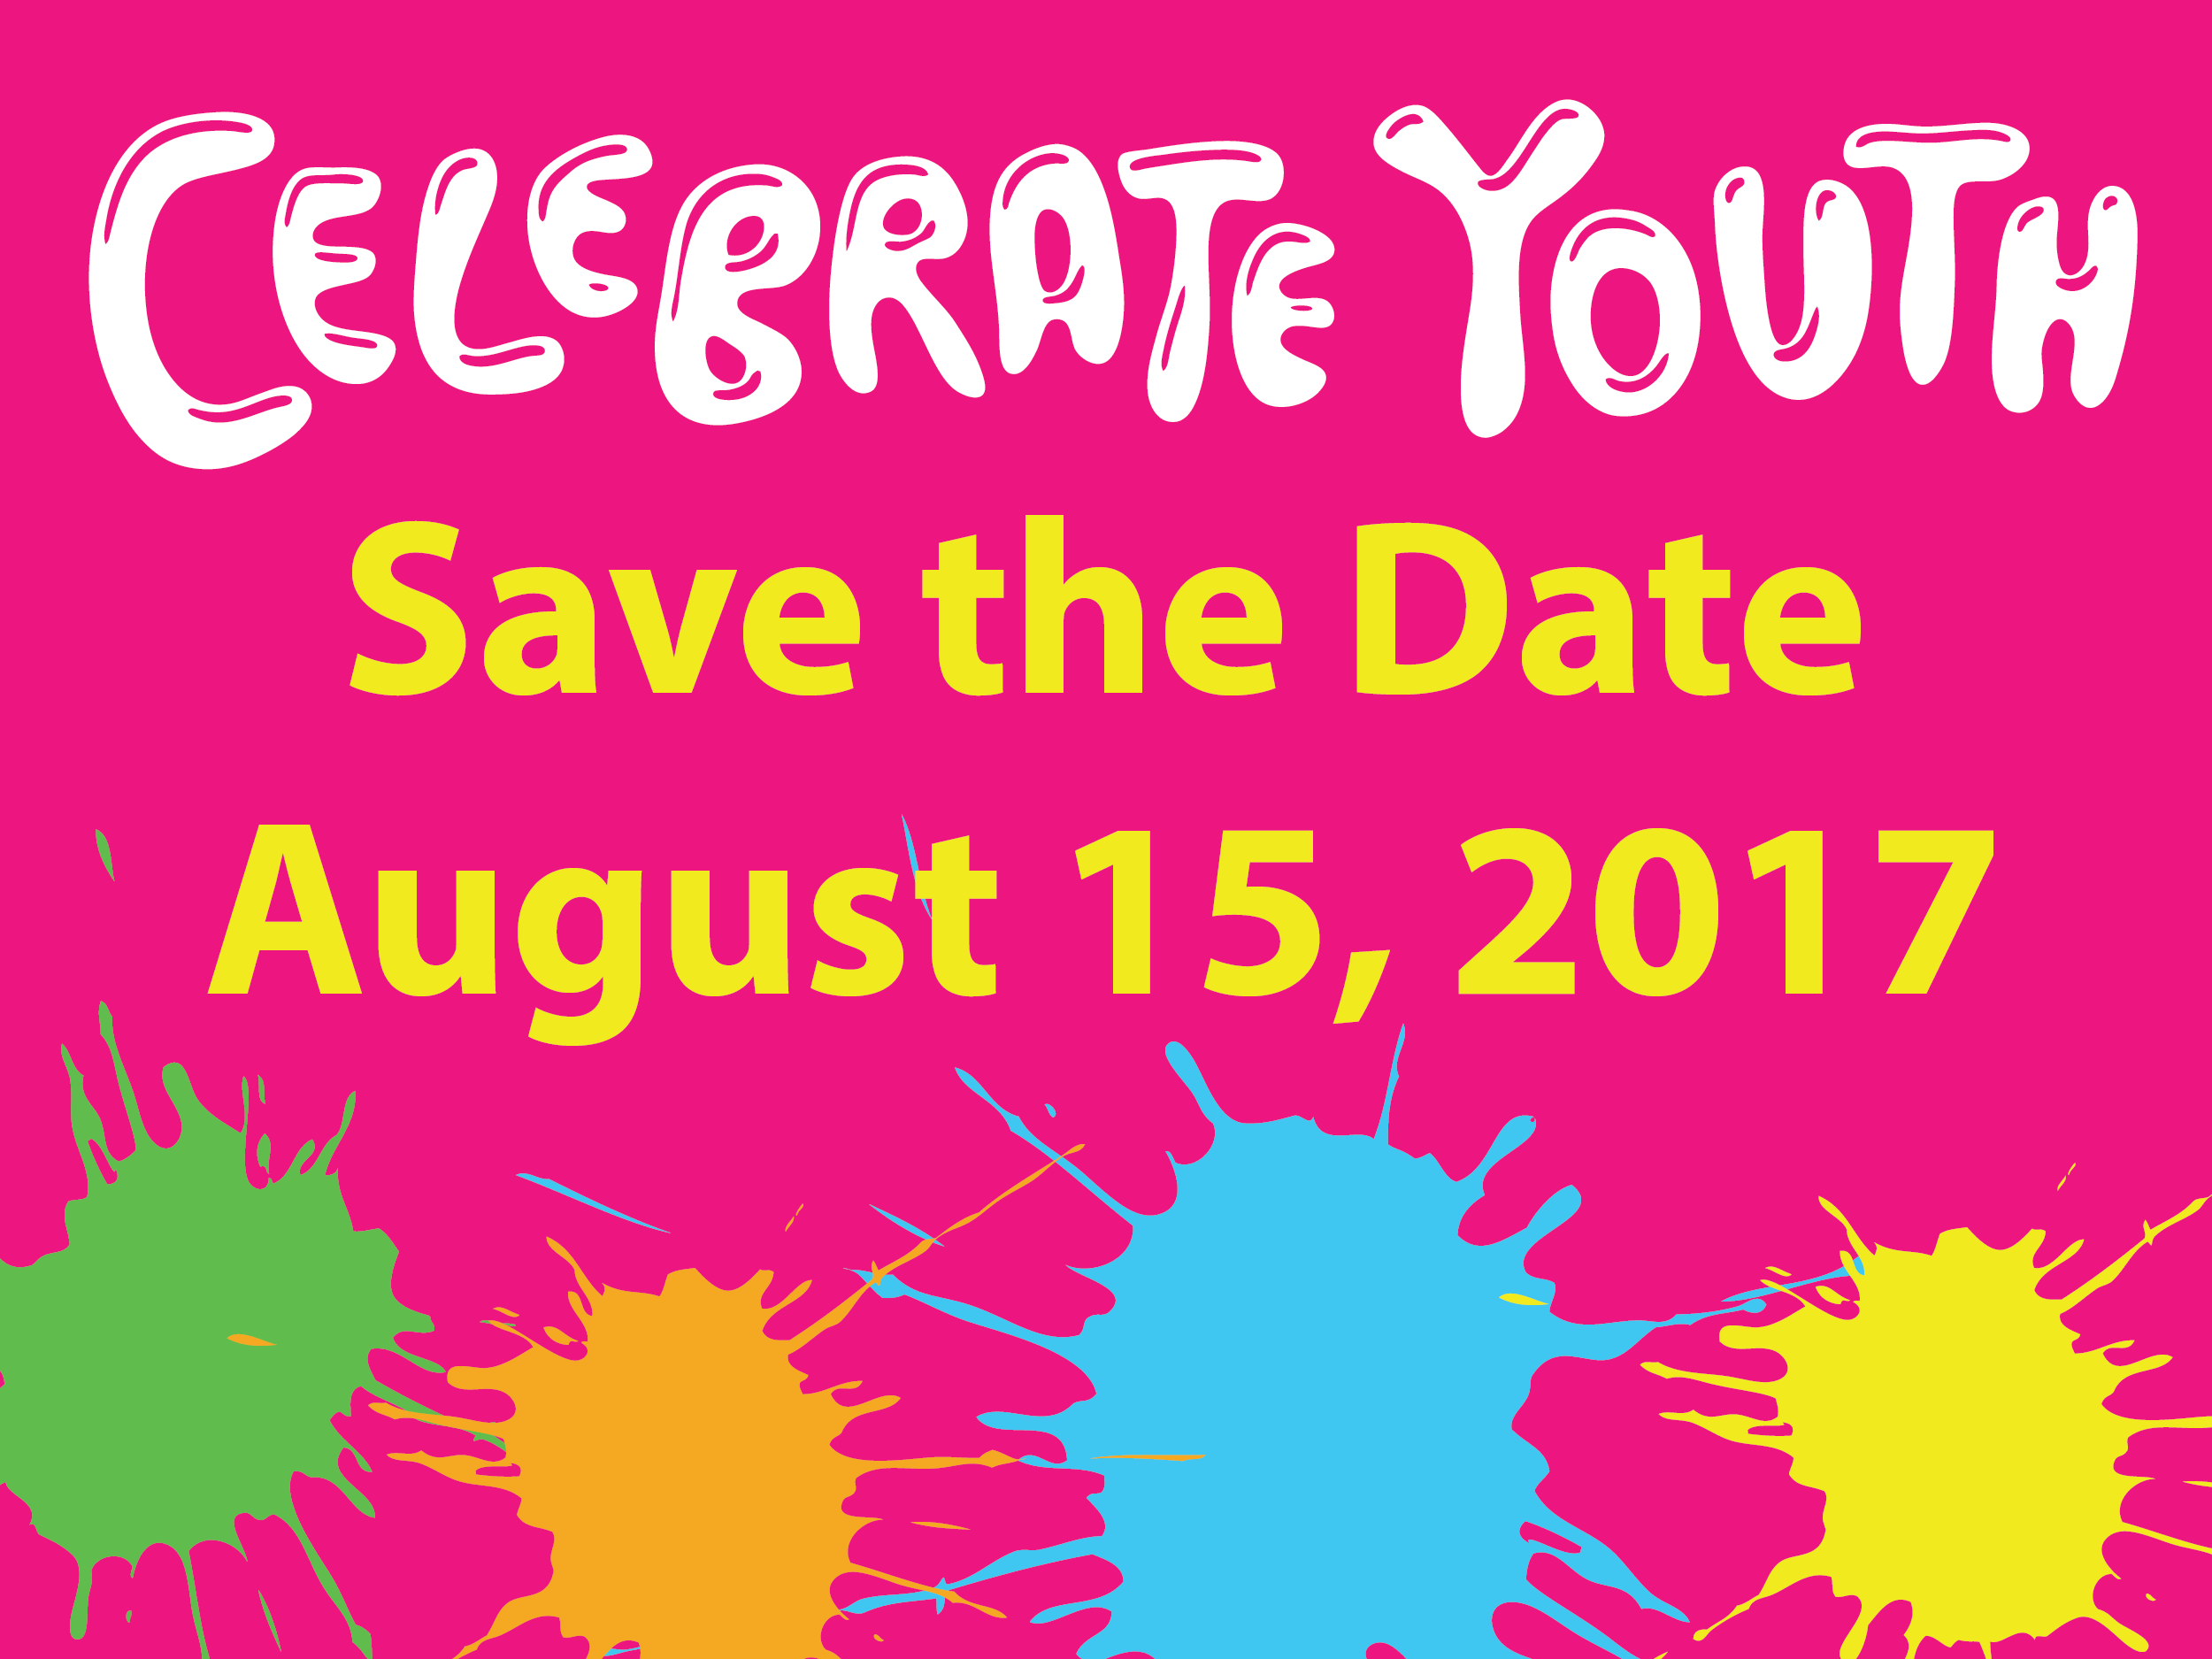 Celebrate Youth will be on August 15, 2017